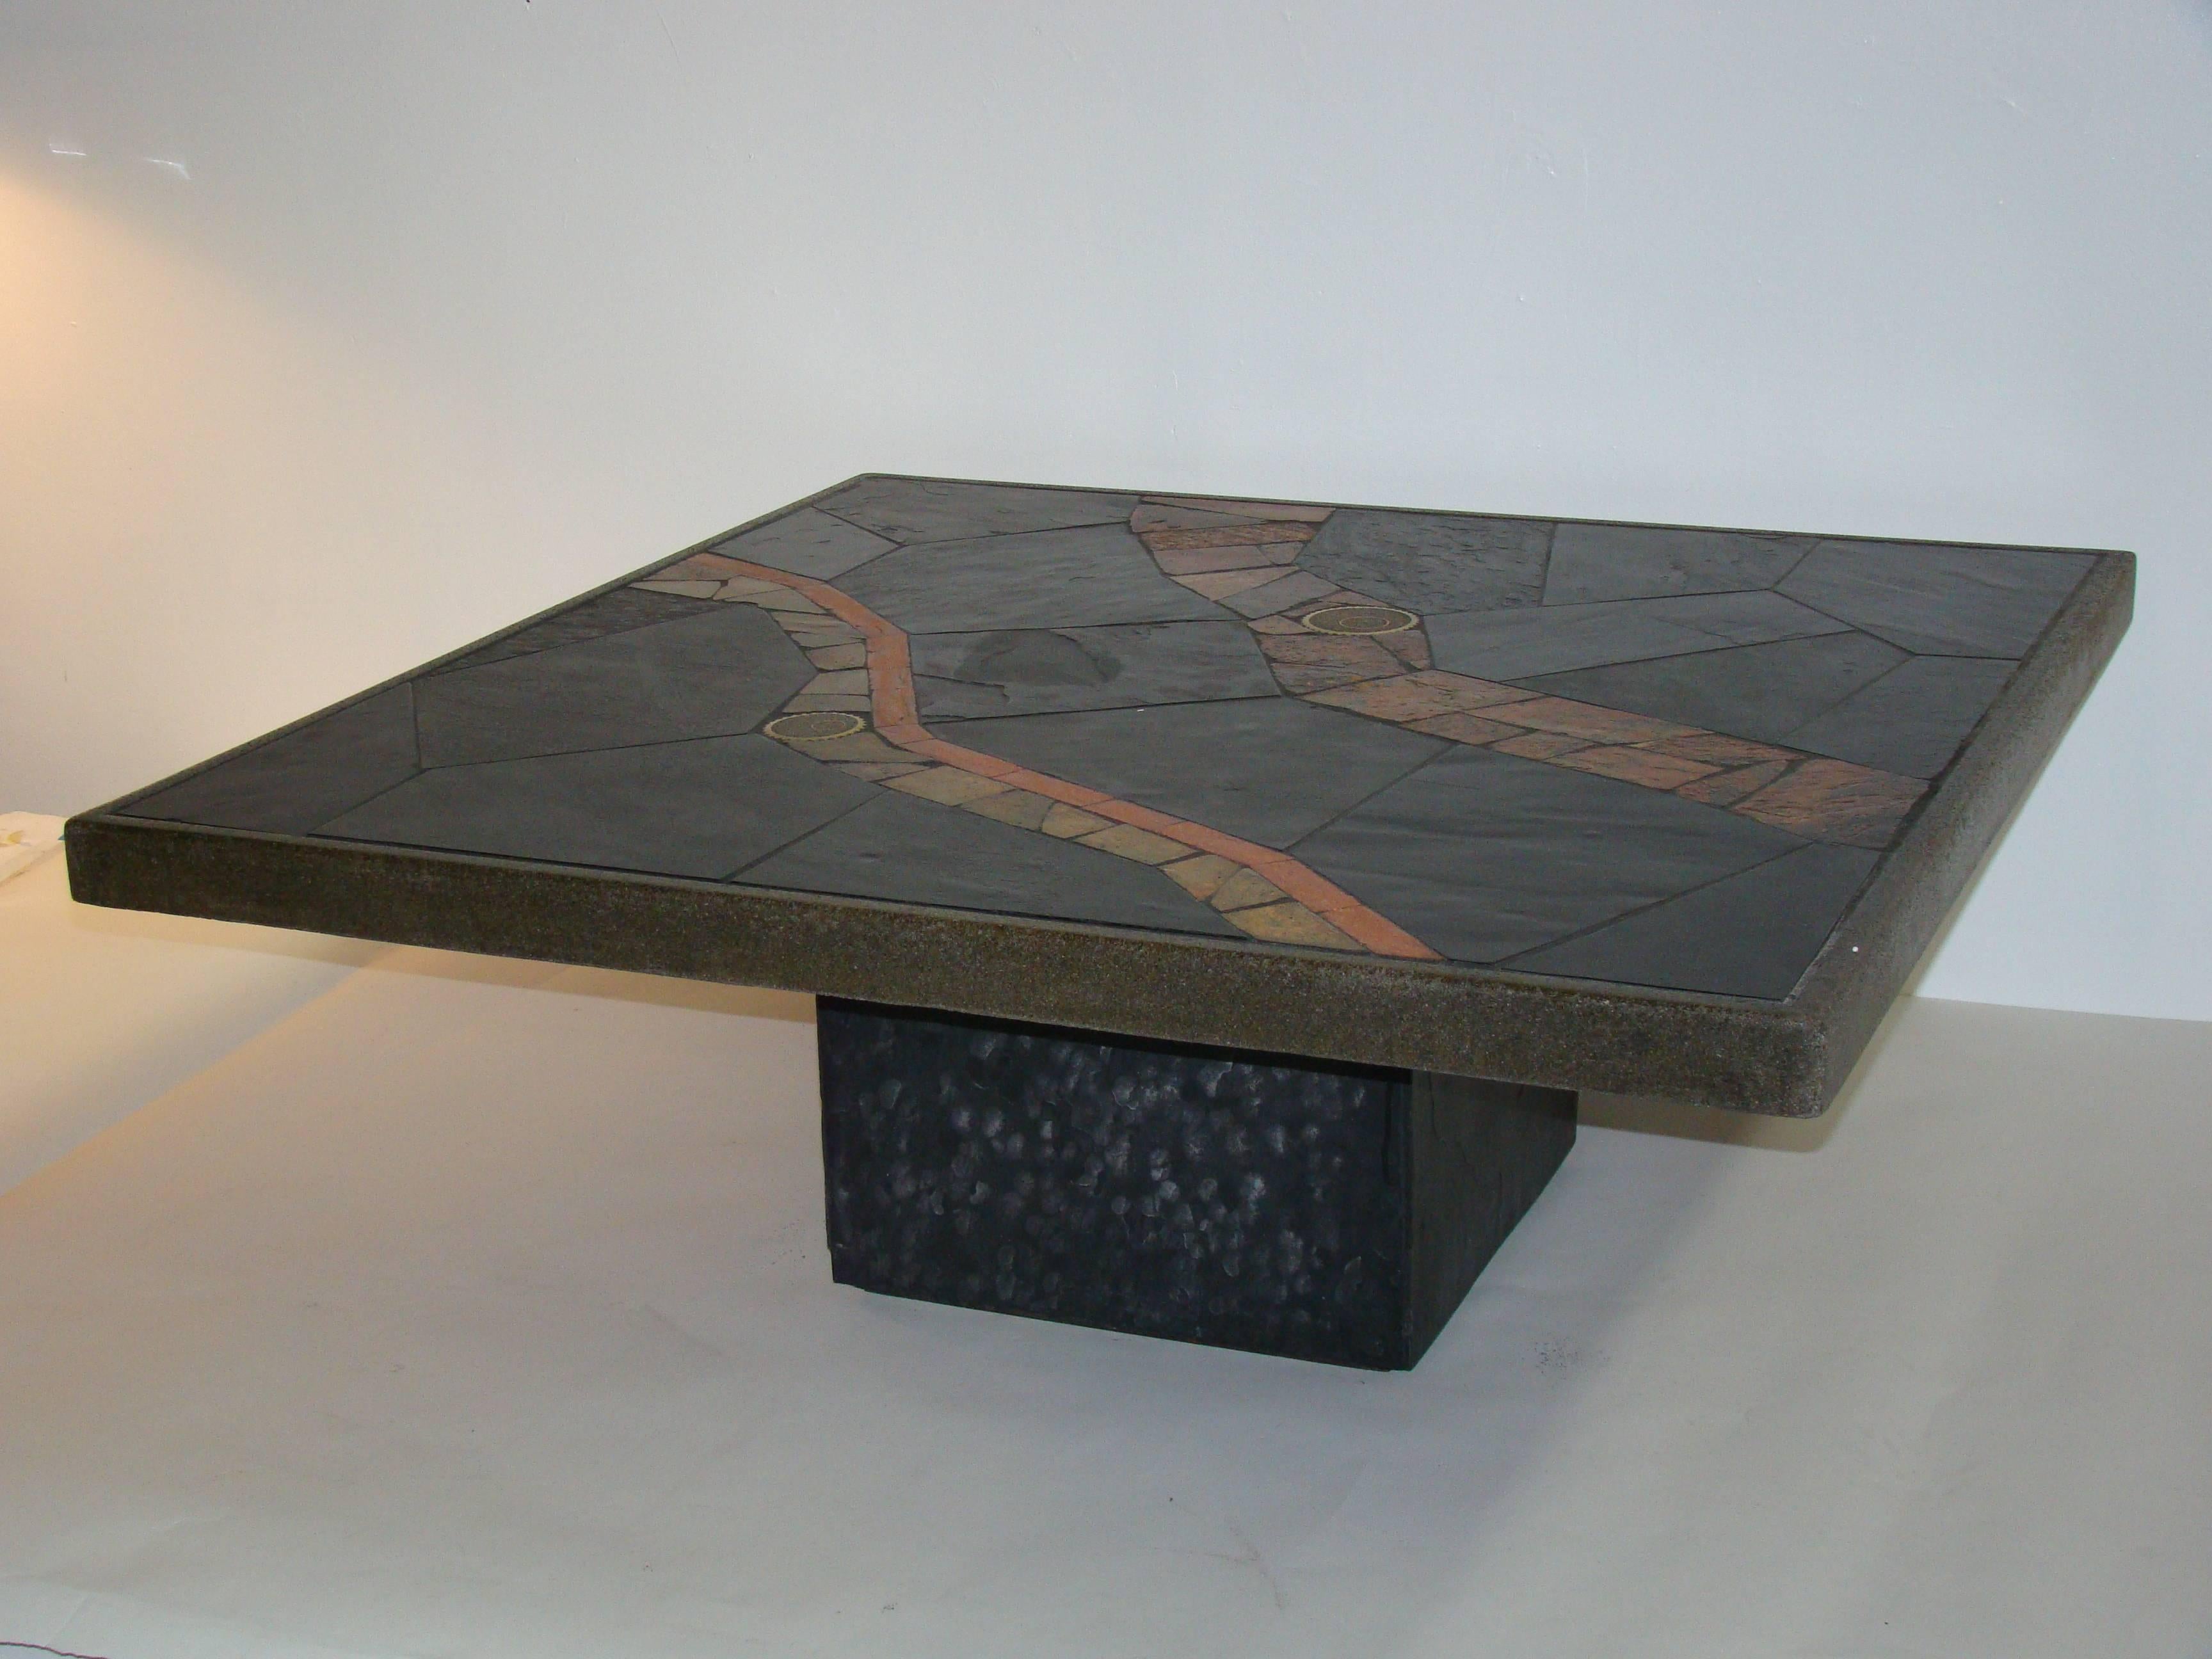 An organic assemblage of richly colored African slate incorporating inlays of machined brass elements on a platform of moss stained concrete that rests on a square black slate base. Unsigned.